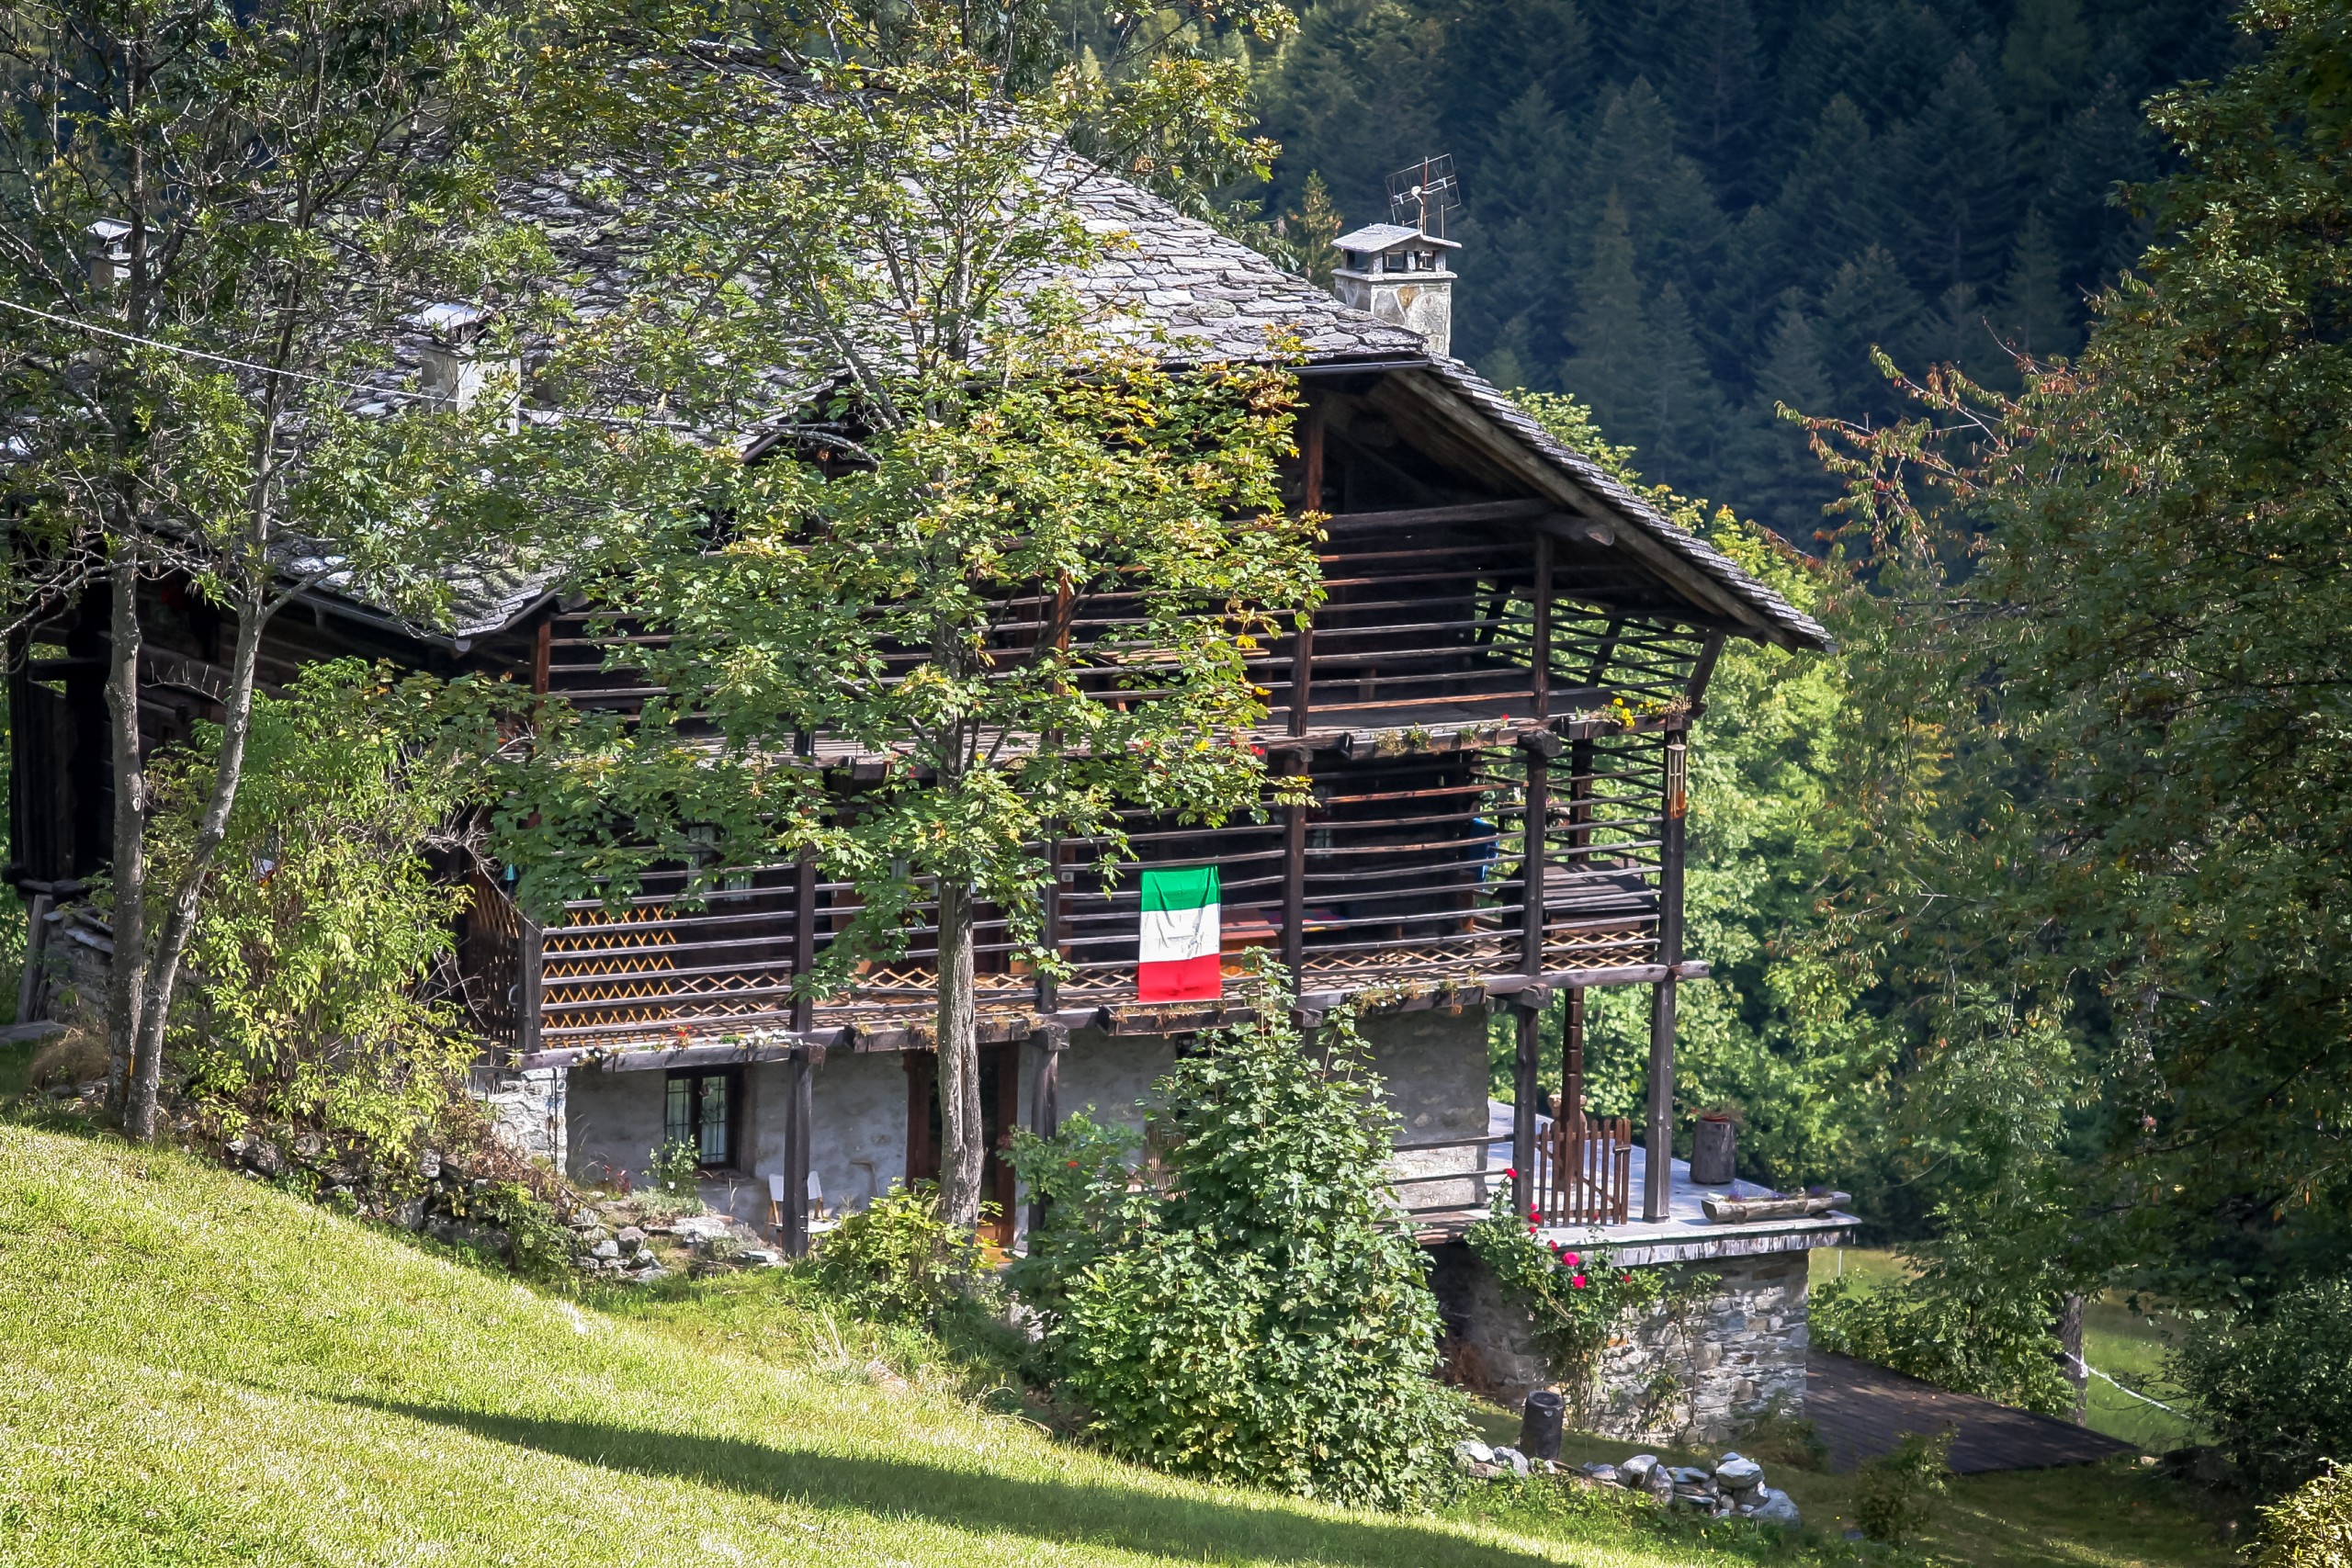 A Wooden House in Alagna Valsesia